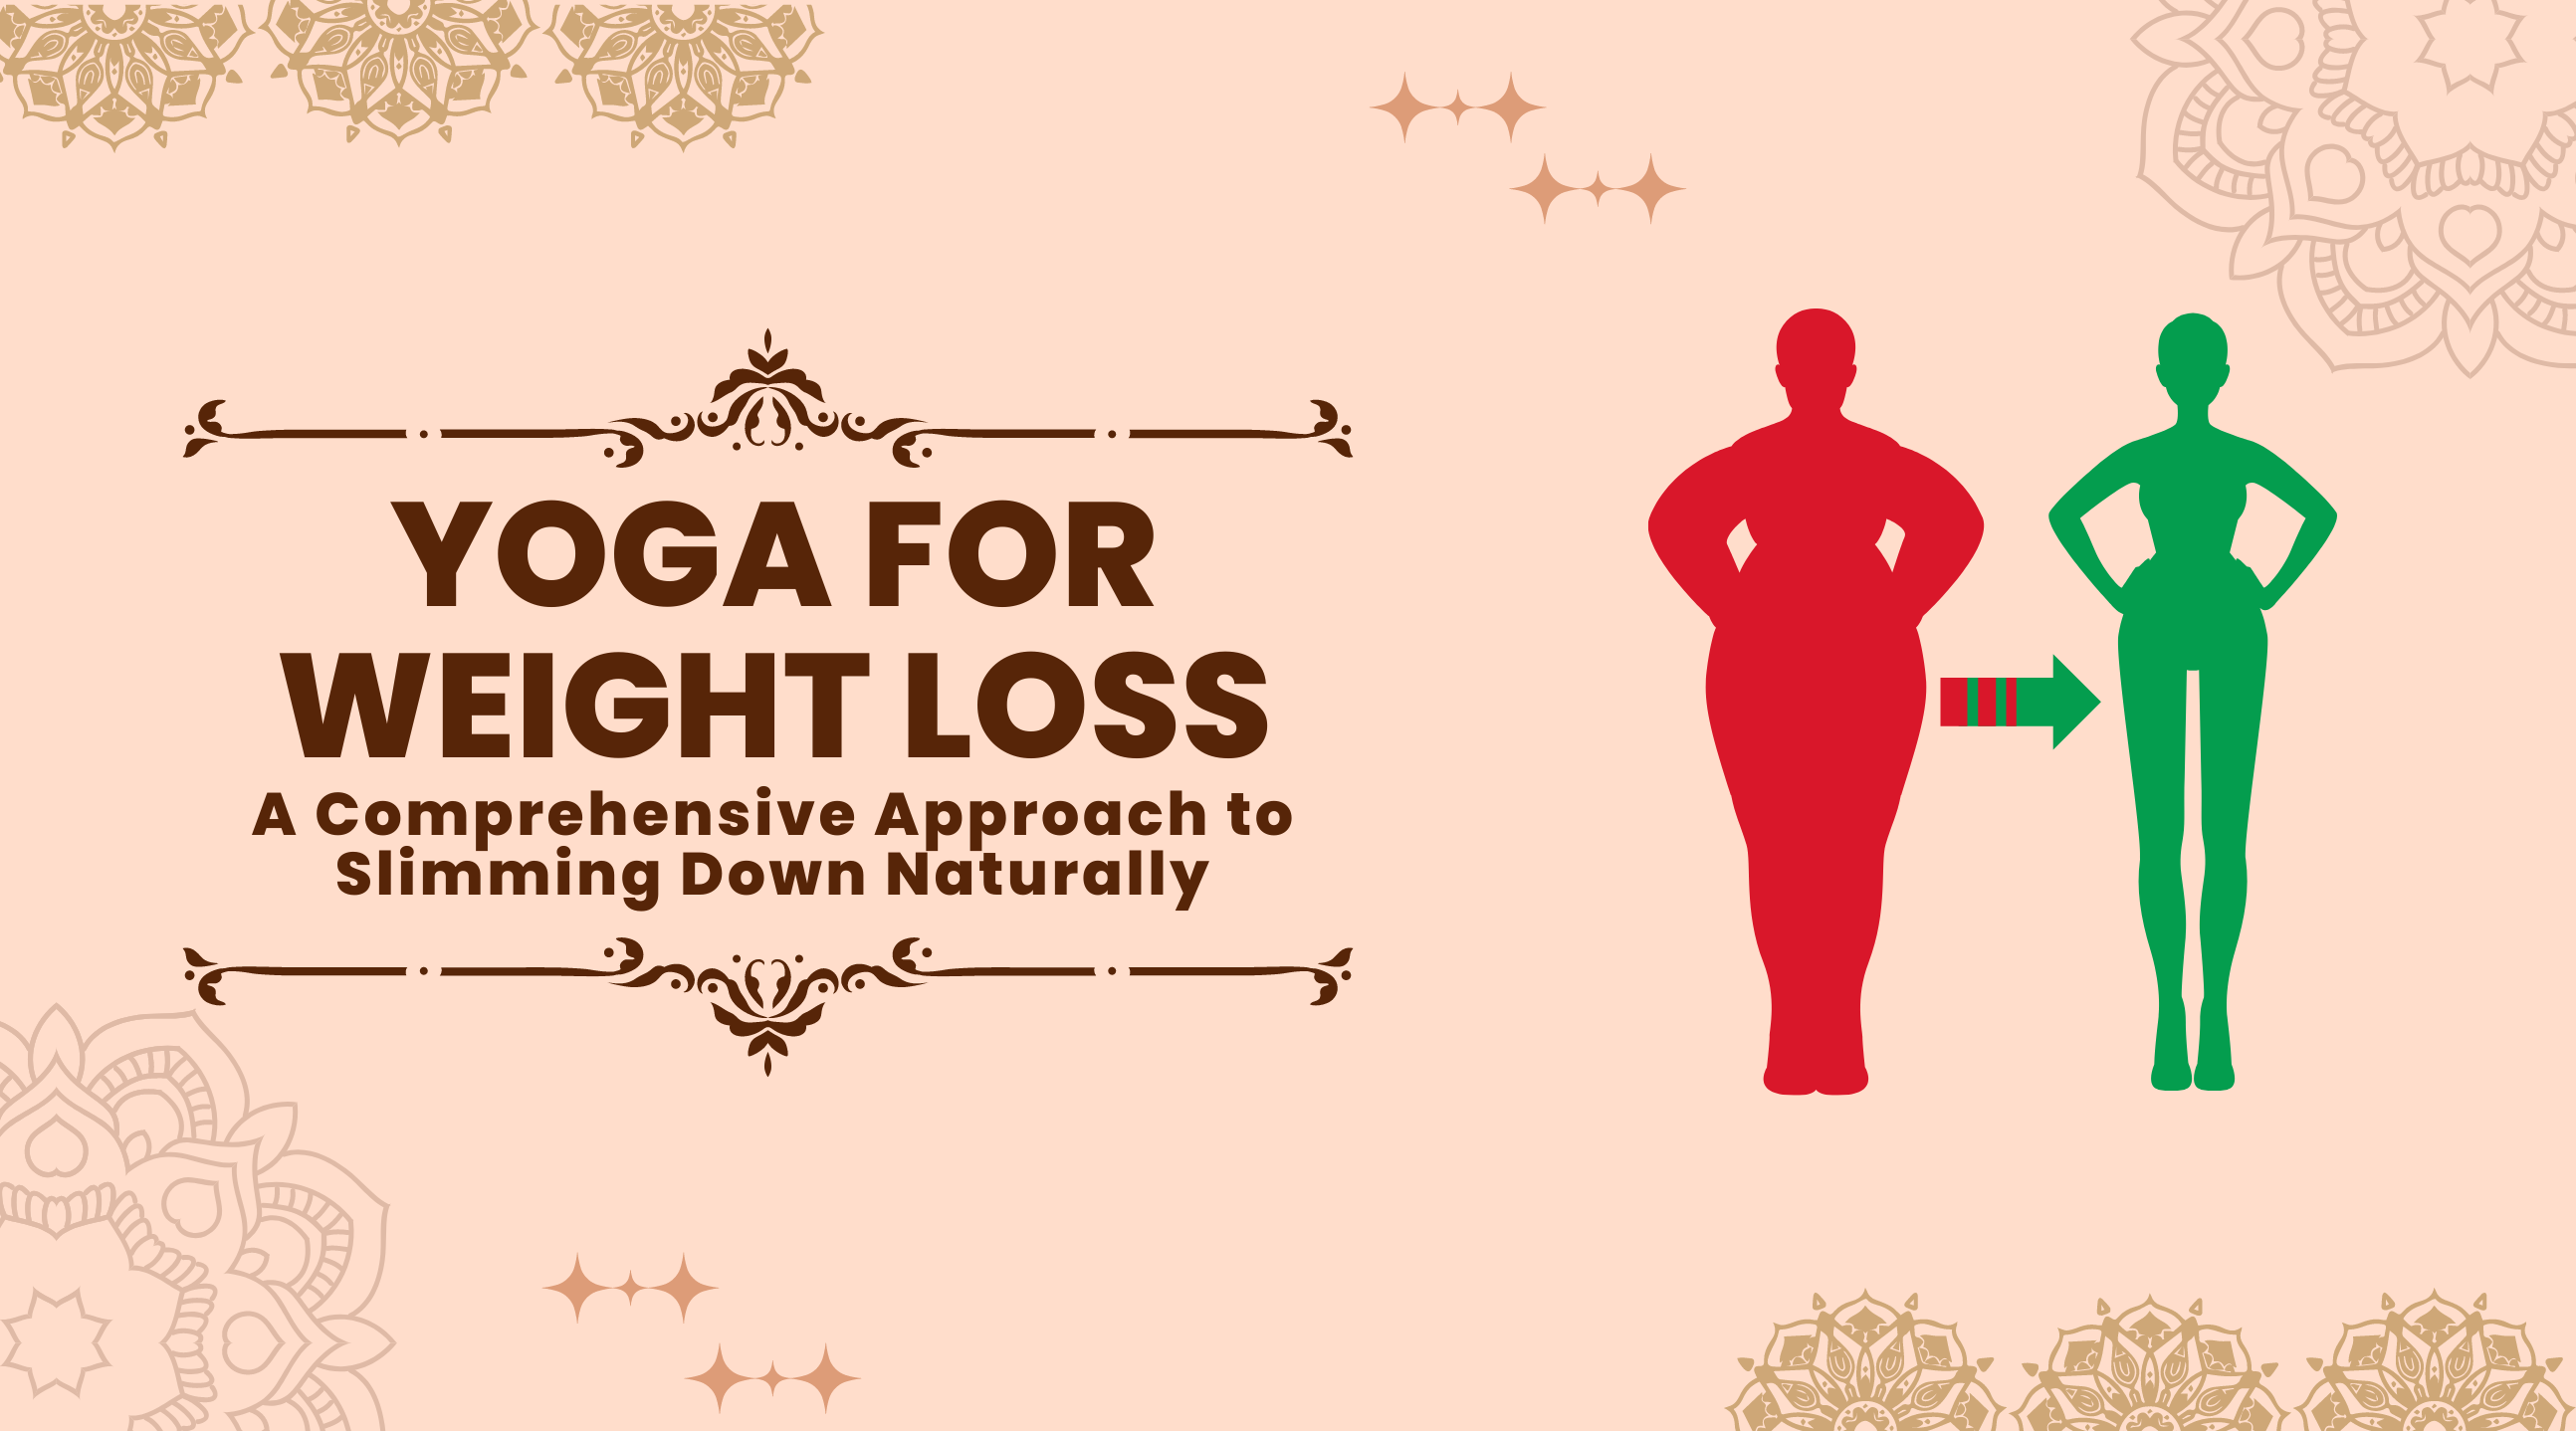 Yoga for Weight Loss: A Comprehensive Approach to Slimming Down Naturally